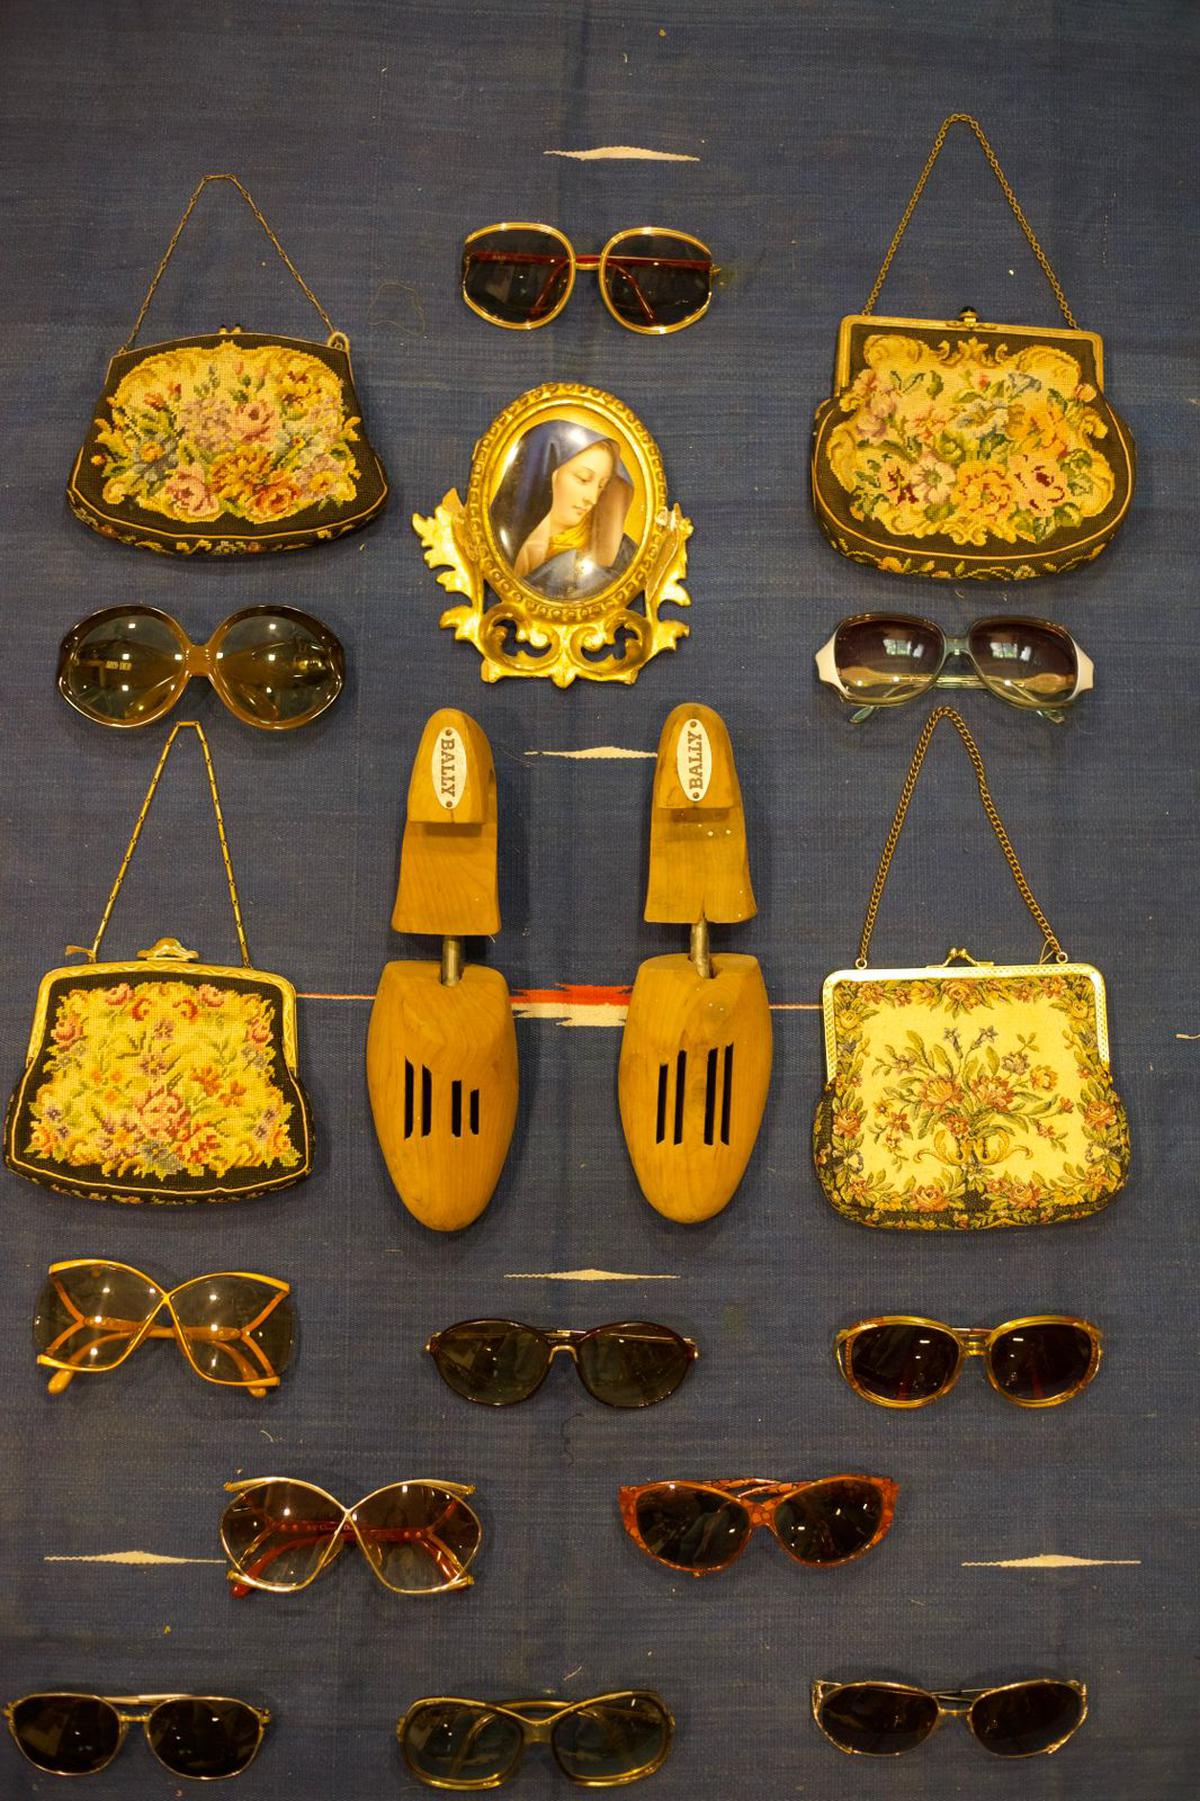 The showcase offers 30 sunglasses, brooches and Christian art